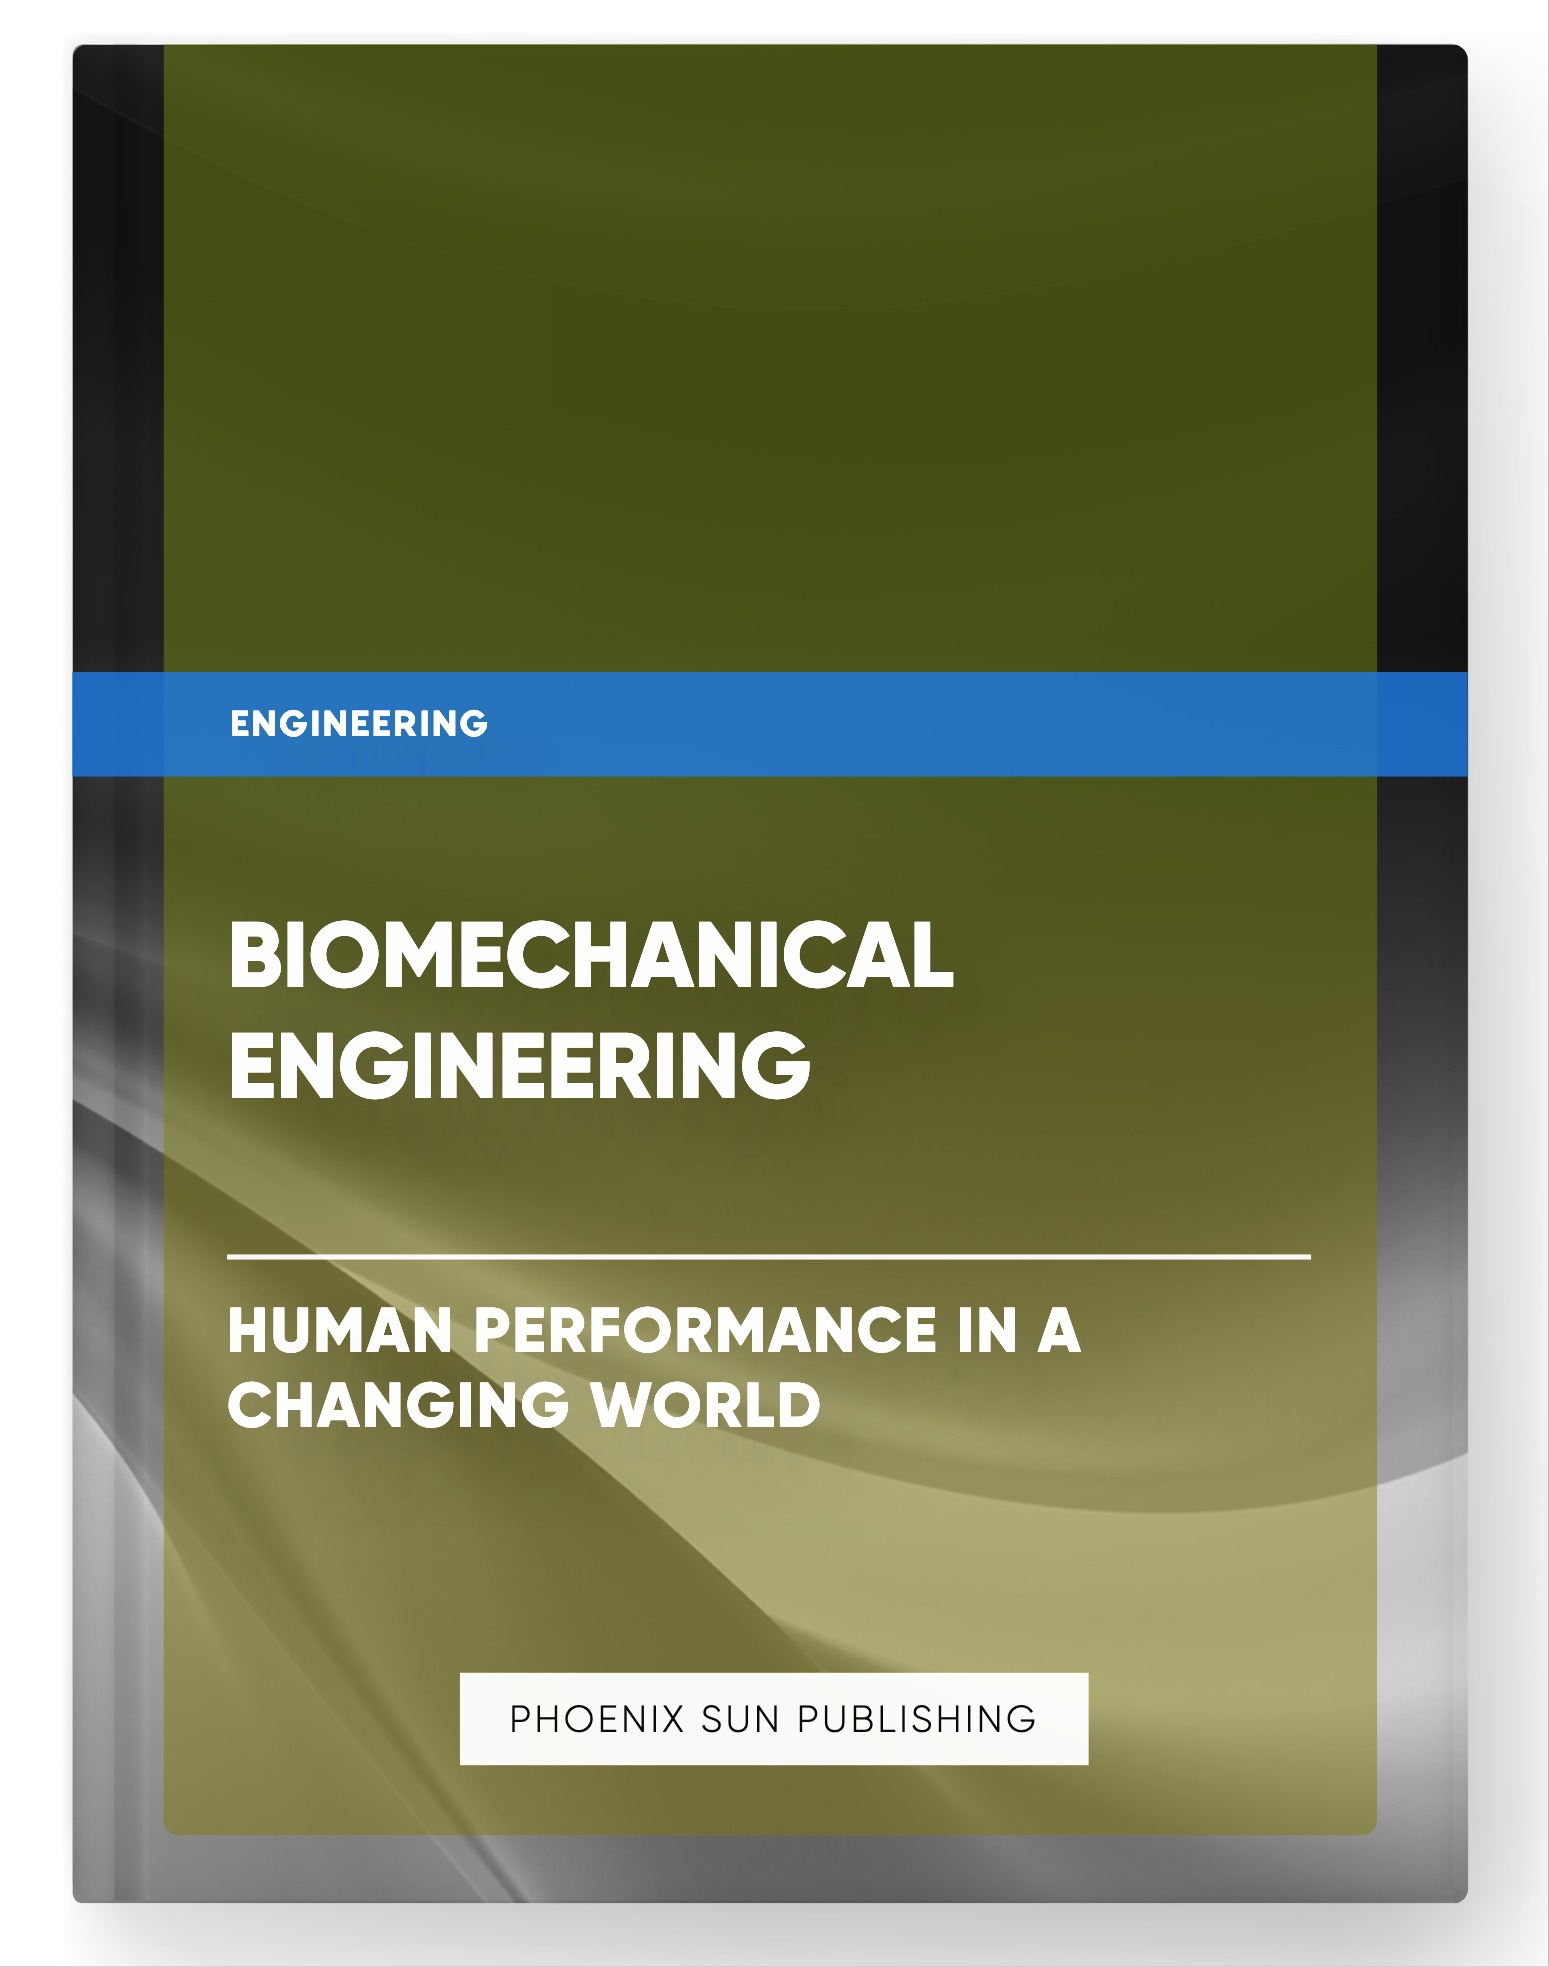 Biomechanical Engineering – Human Performance in a Changing World